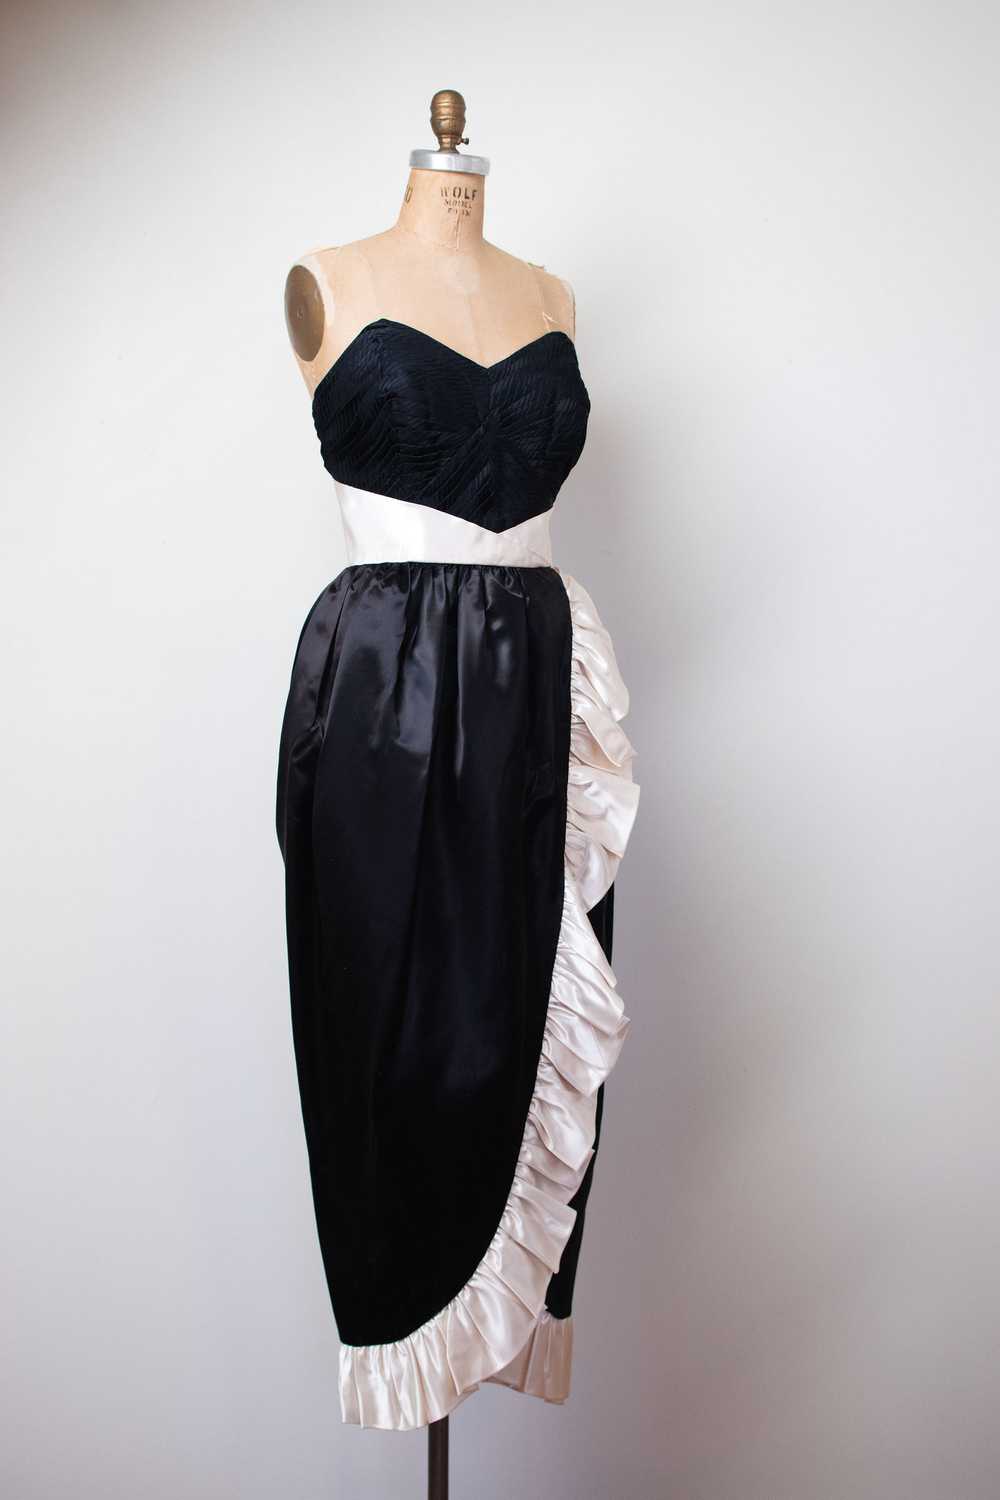 1970s Ruffled Satin Gown - image 7